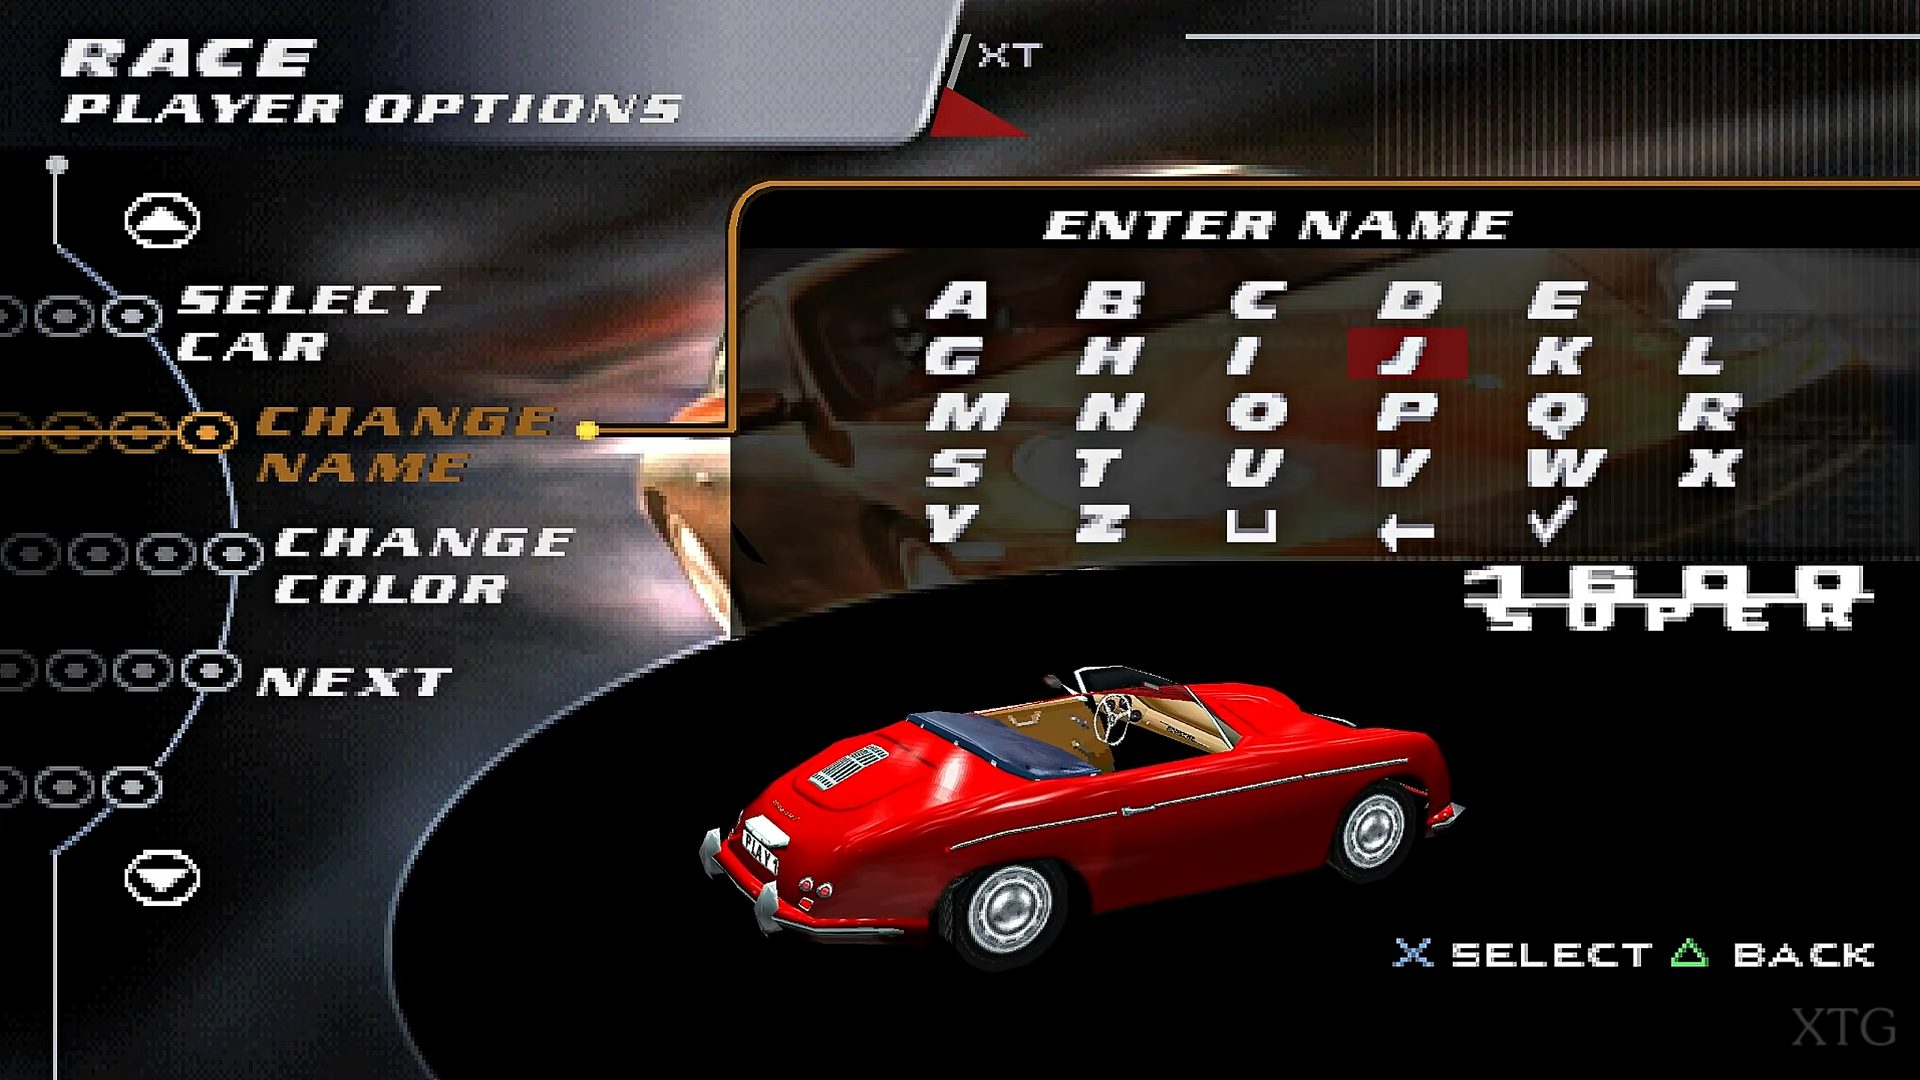 Need for Speed - Porsche 2000 (Europe) (Fr,It,Es) ROM (ISO